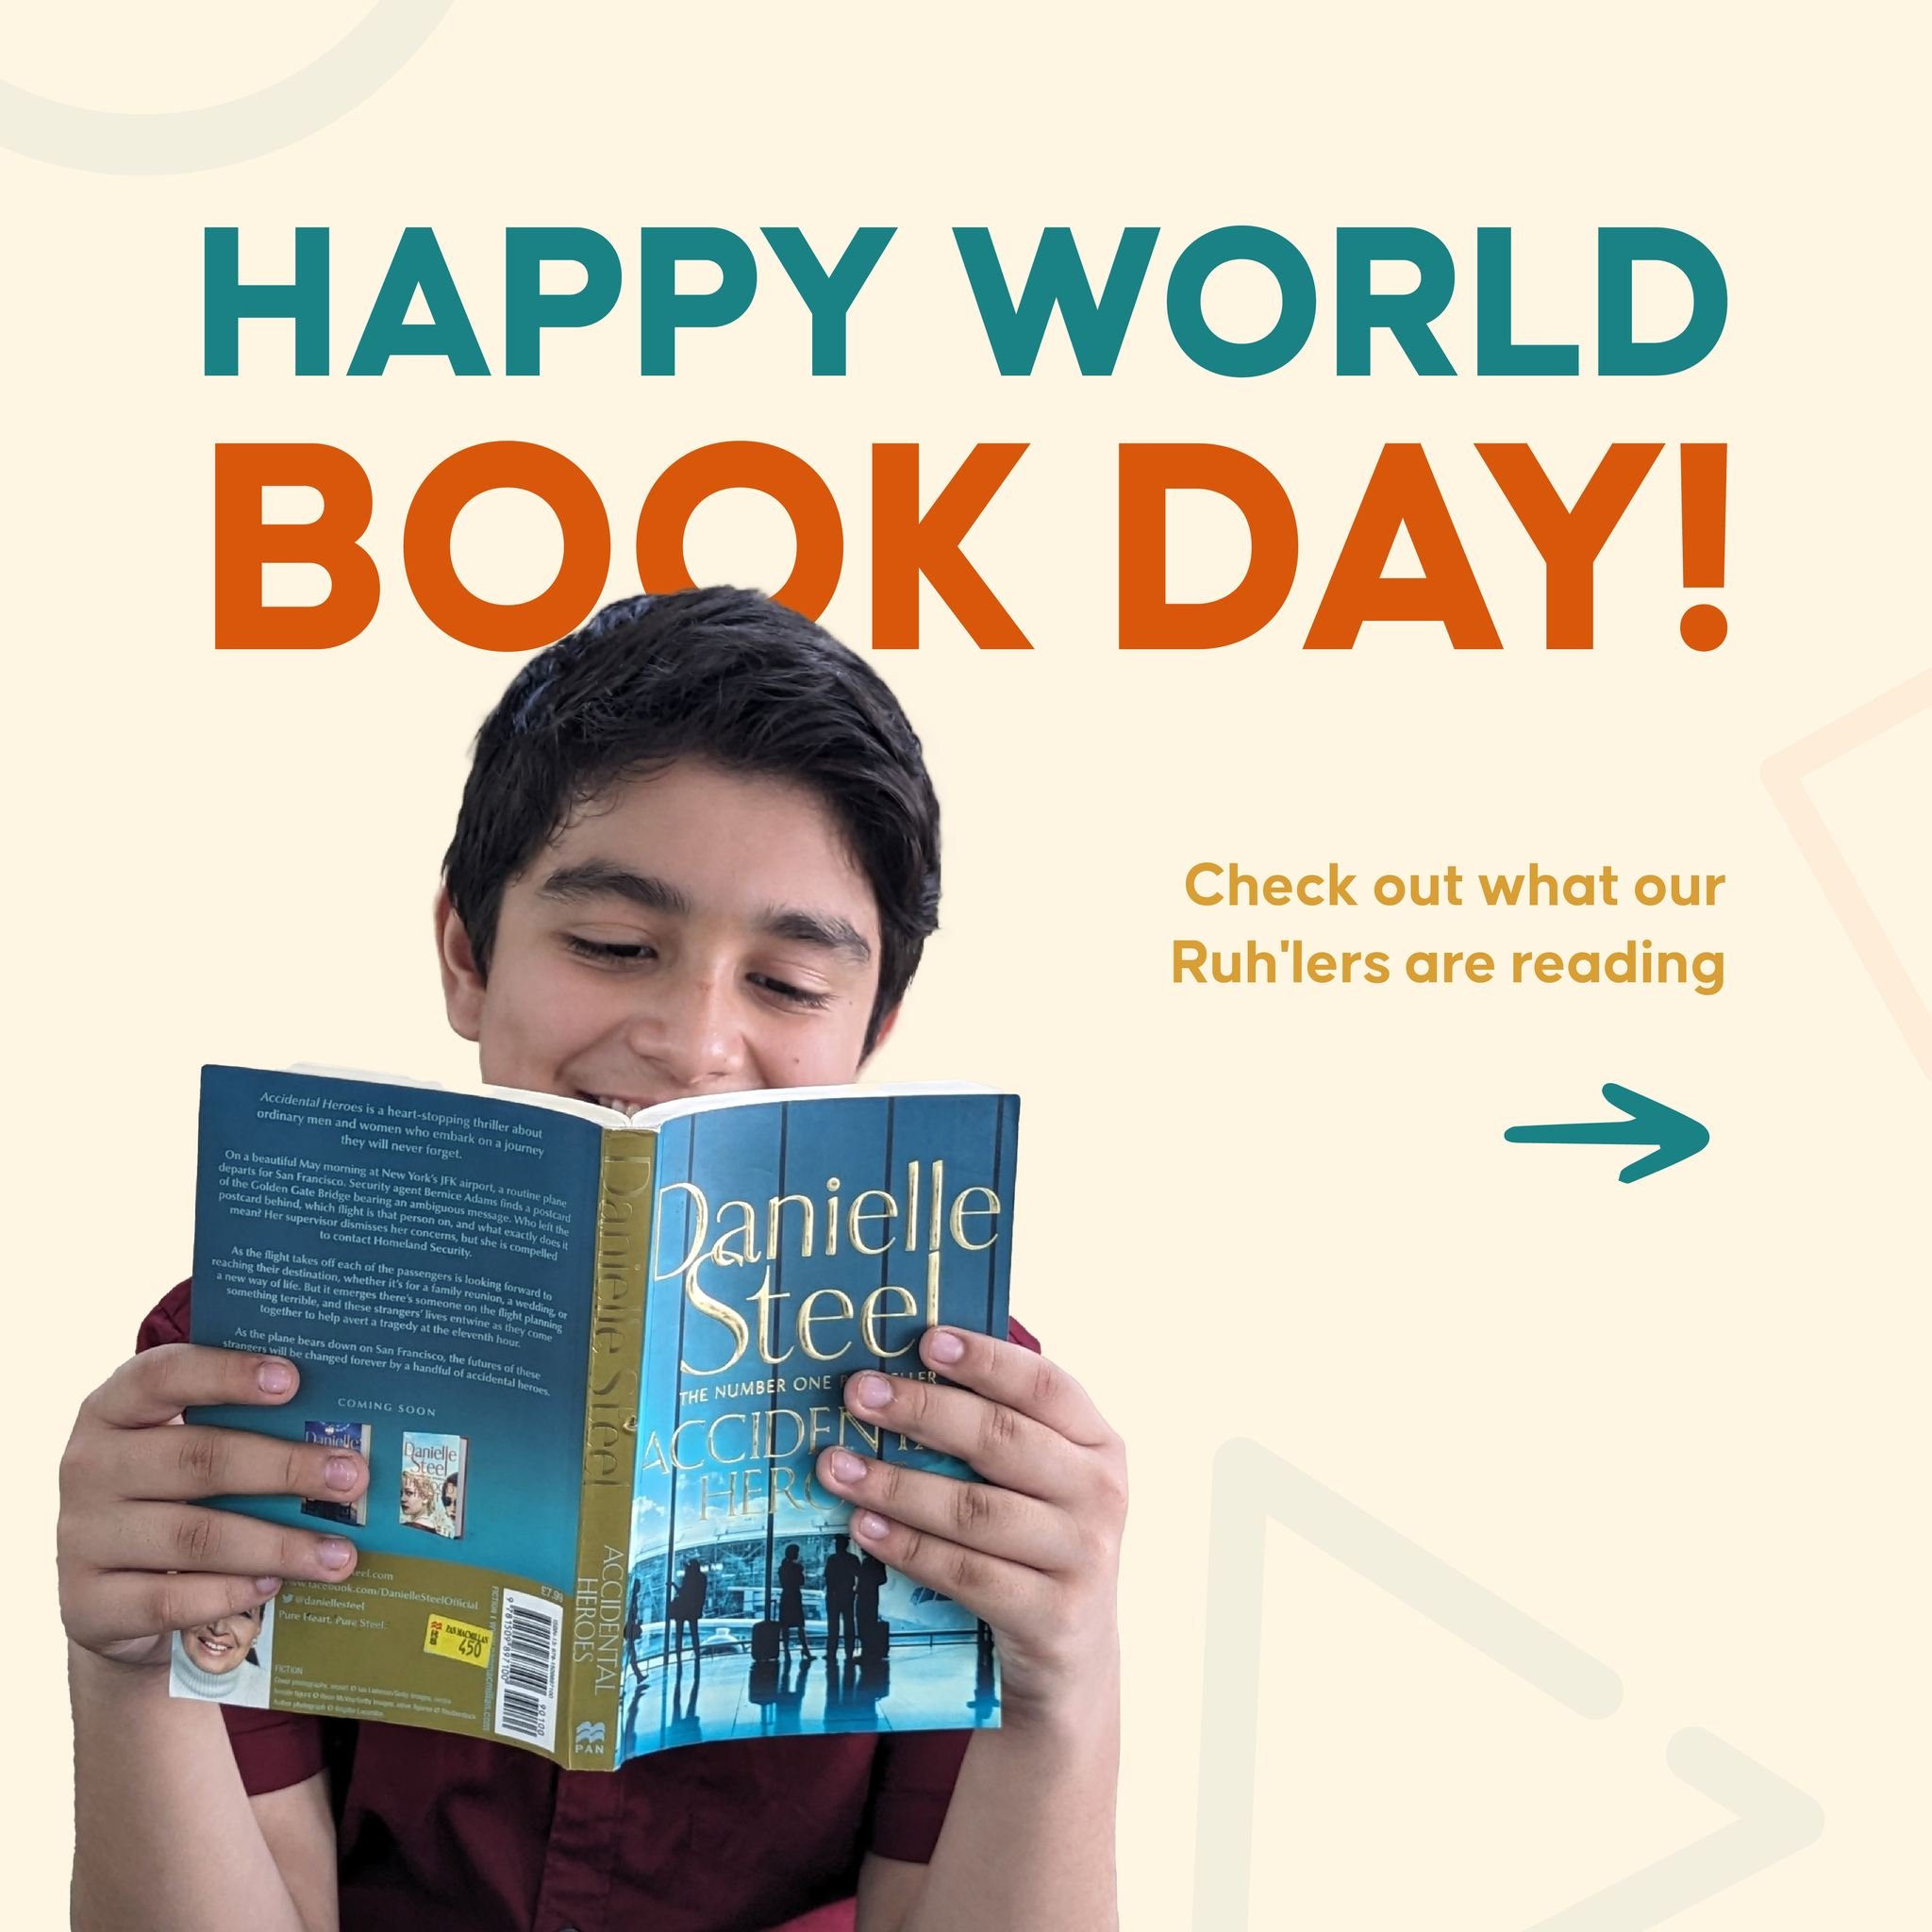 Celebrate World Book Day with us! 🎉 Join the Ruh'lers as they embark on literary adventures from our extensive library 📖

#RuhContinuumSchool #ruhcontinuum #ruhlers